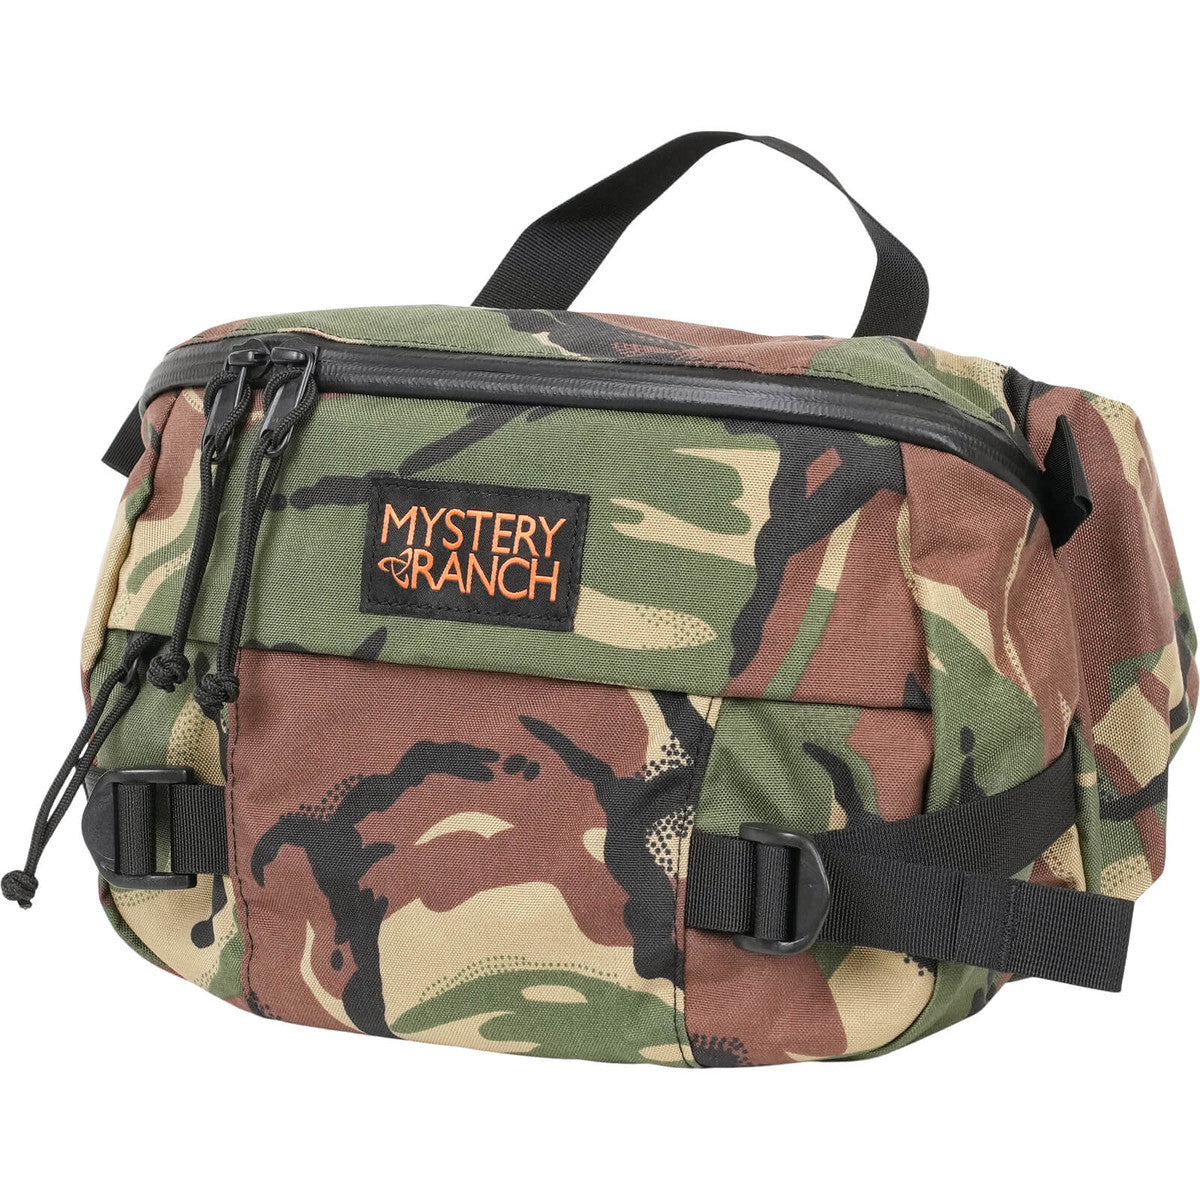 Mystery Ranch Hip Monkey waist pack - Onion River Outdoors